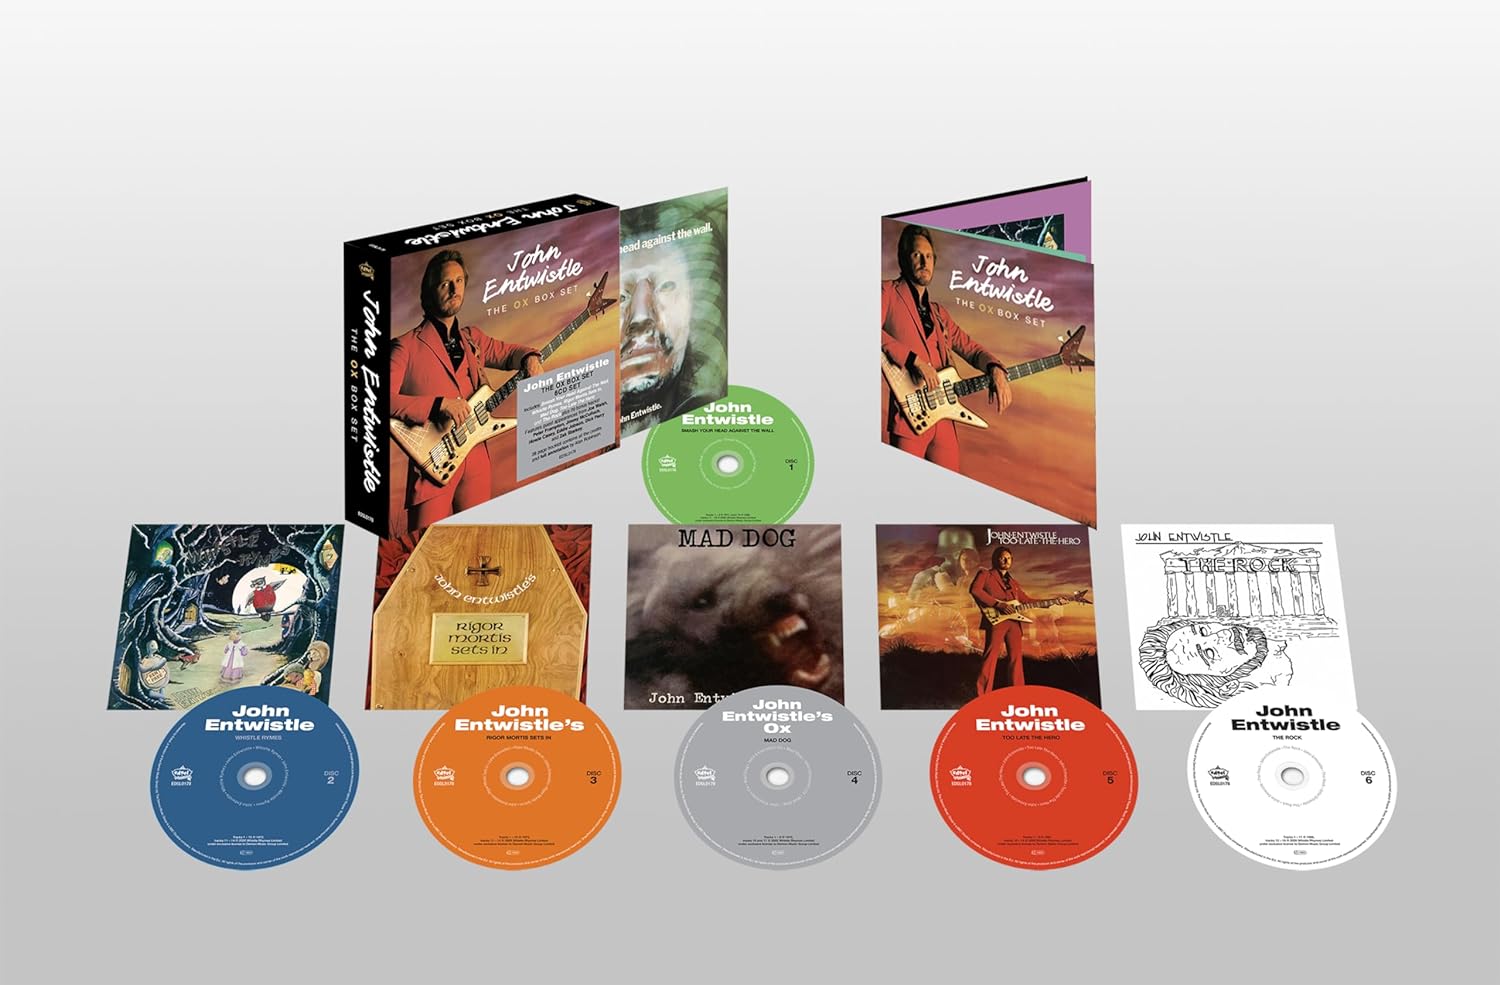 JOHN ENTWISTLE - The Ox Box Set (with 28 page booklet and 29 Bonus Tracks) - 6CD Clamshell Box Set [MAY 10]